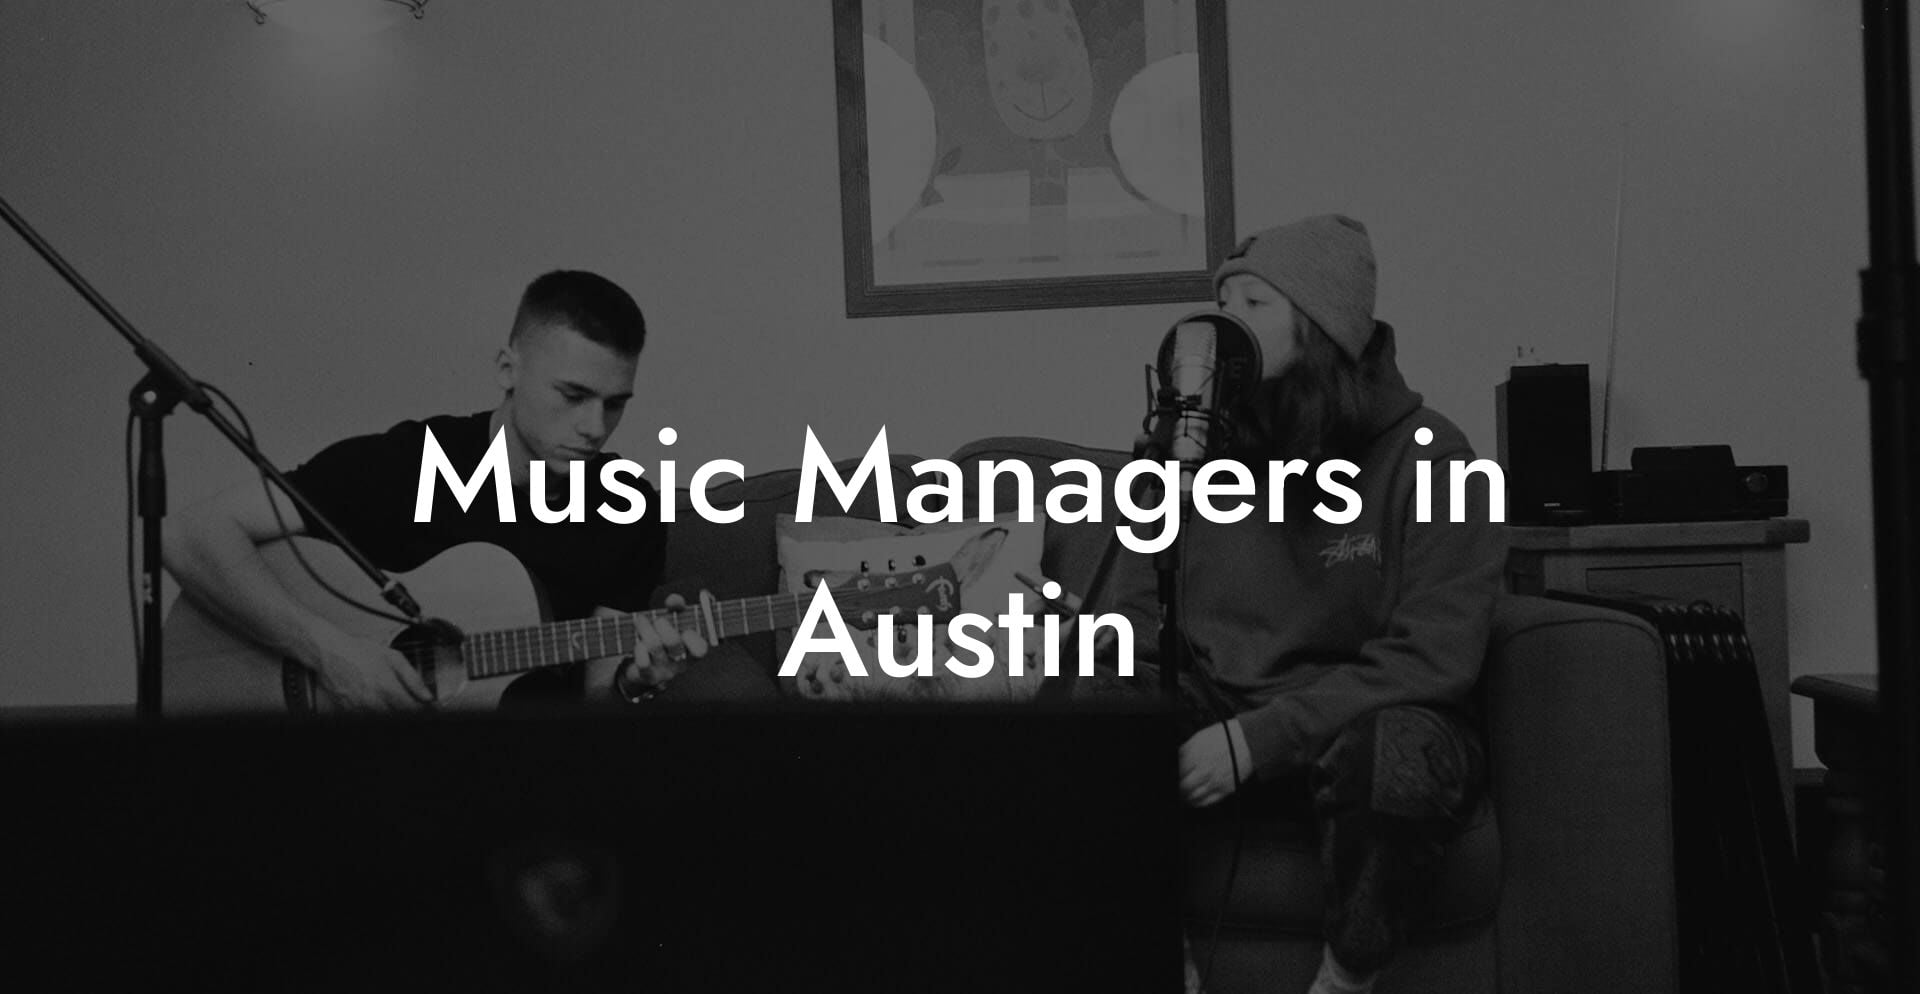 Music Managers in Austin